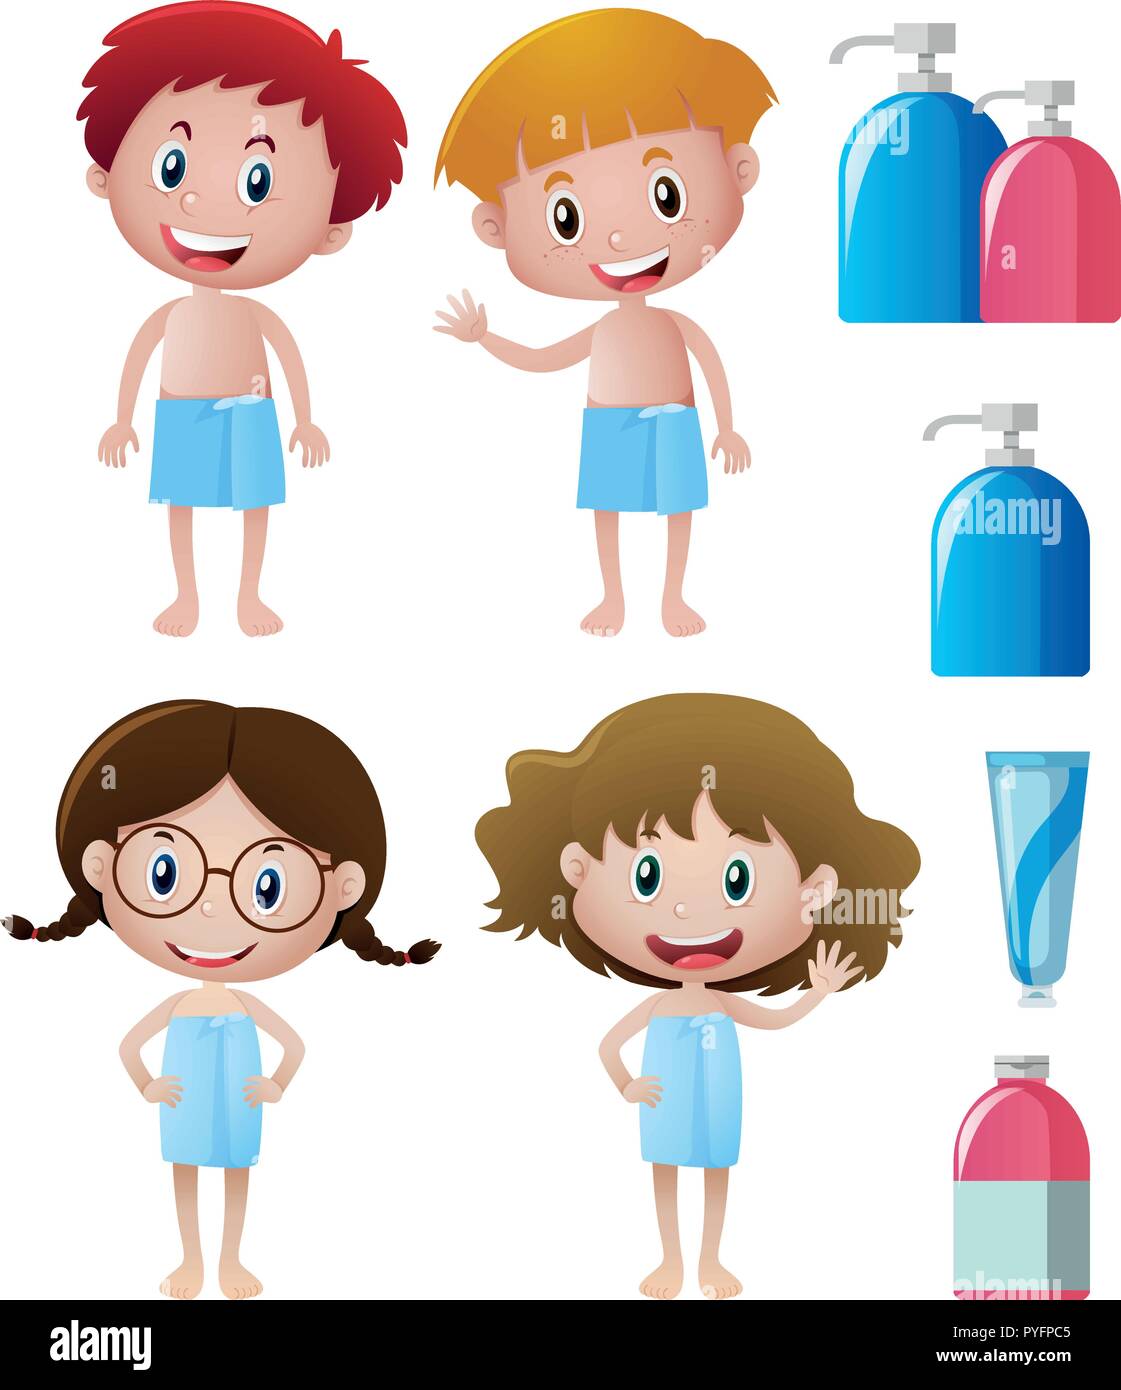 Boys and girls in bathtowels illustration Stock Vector